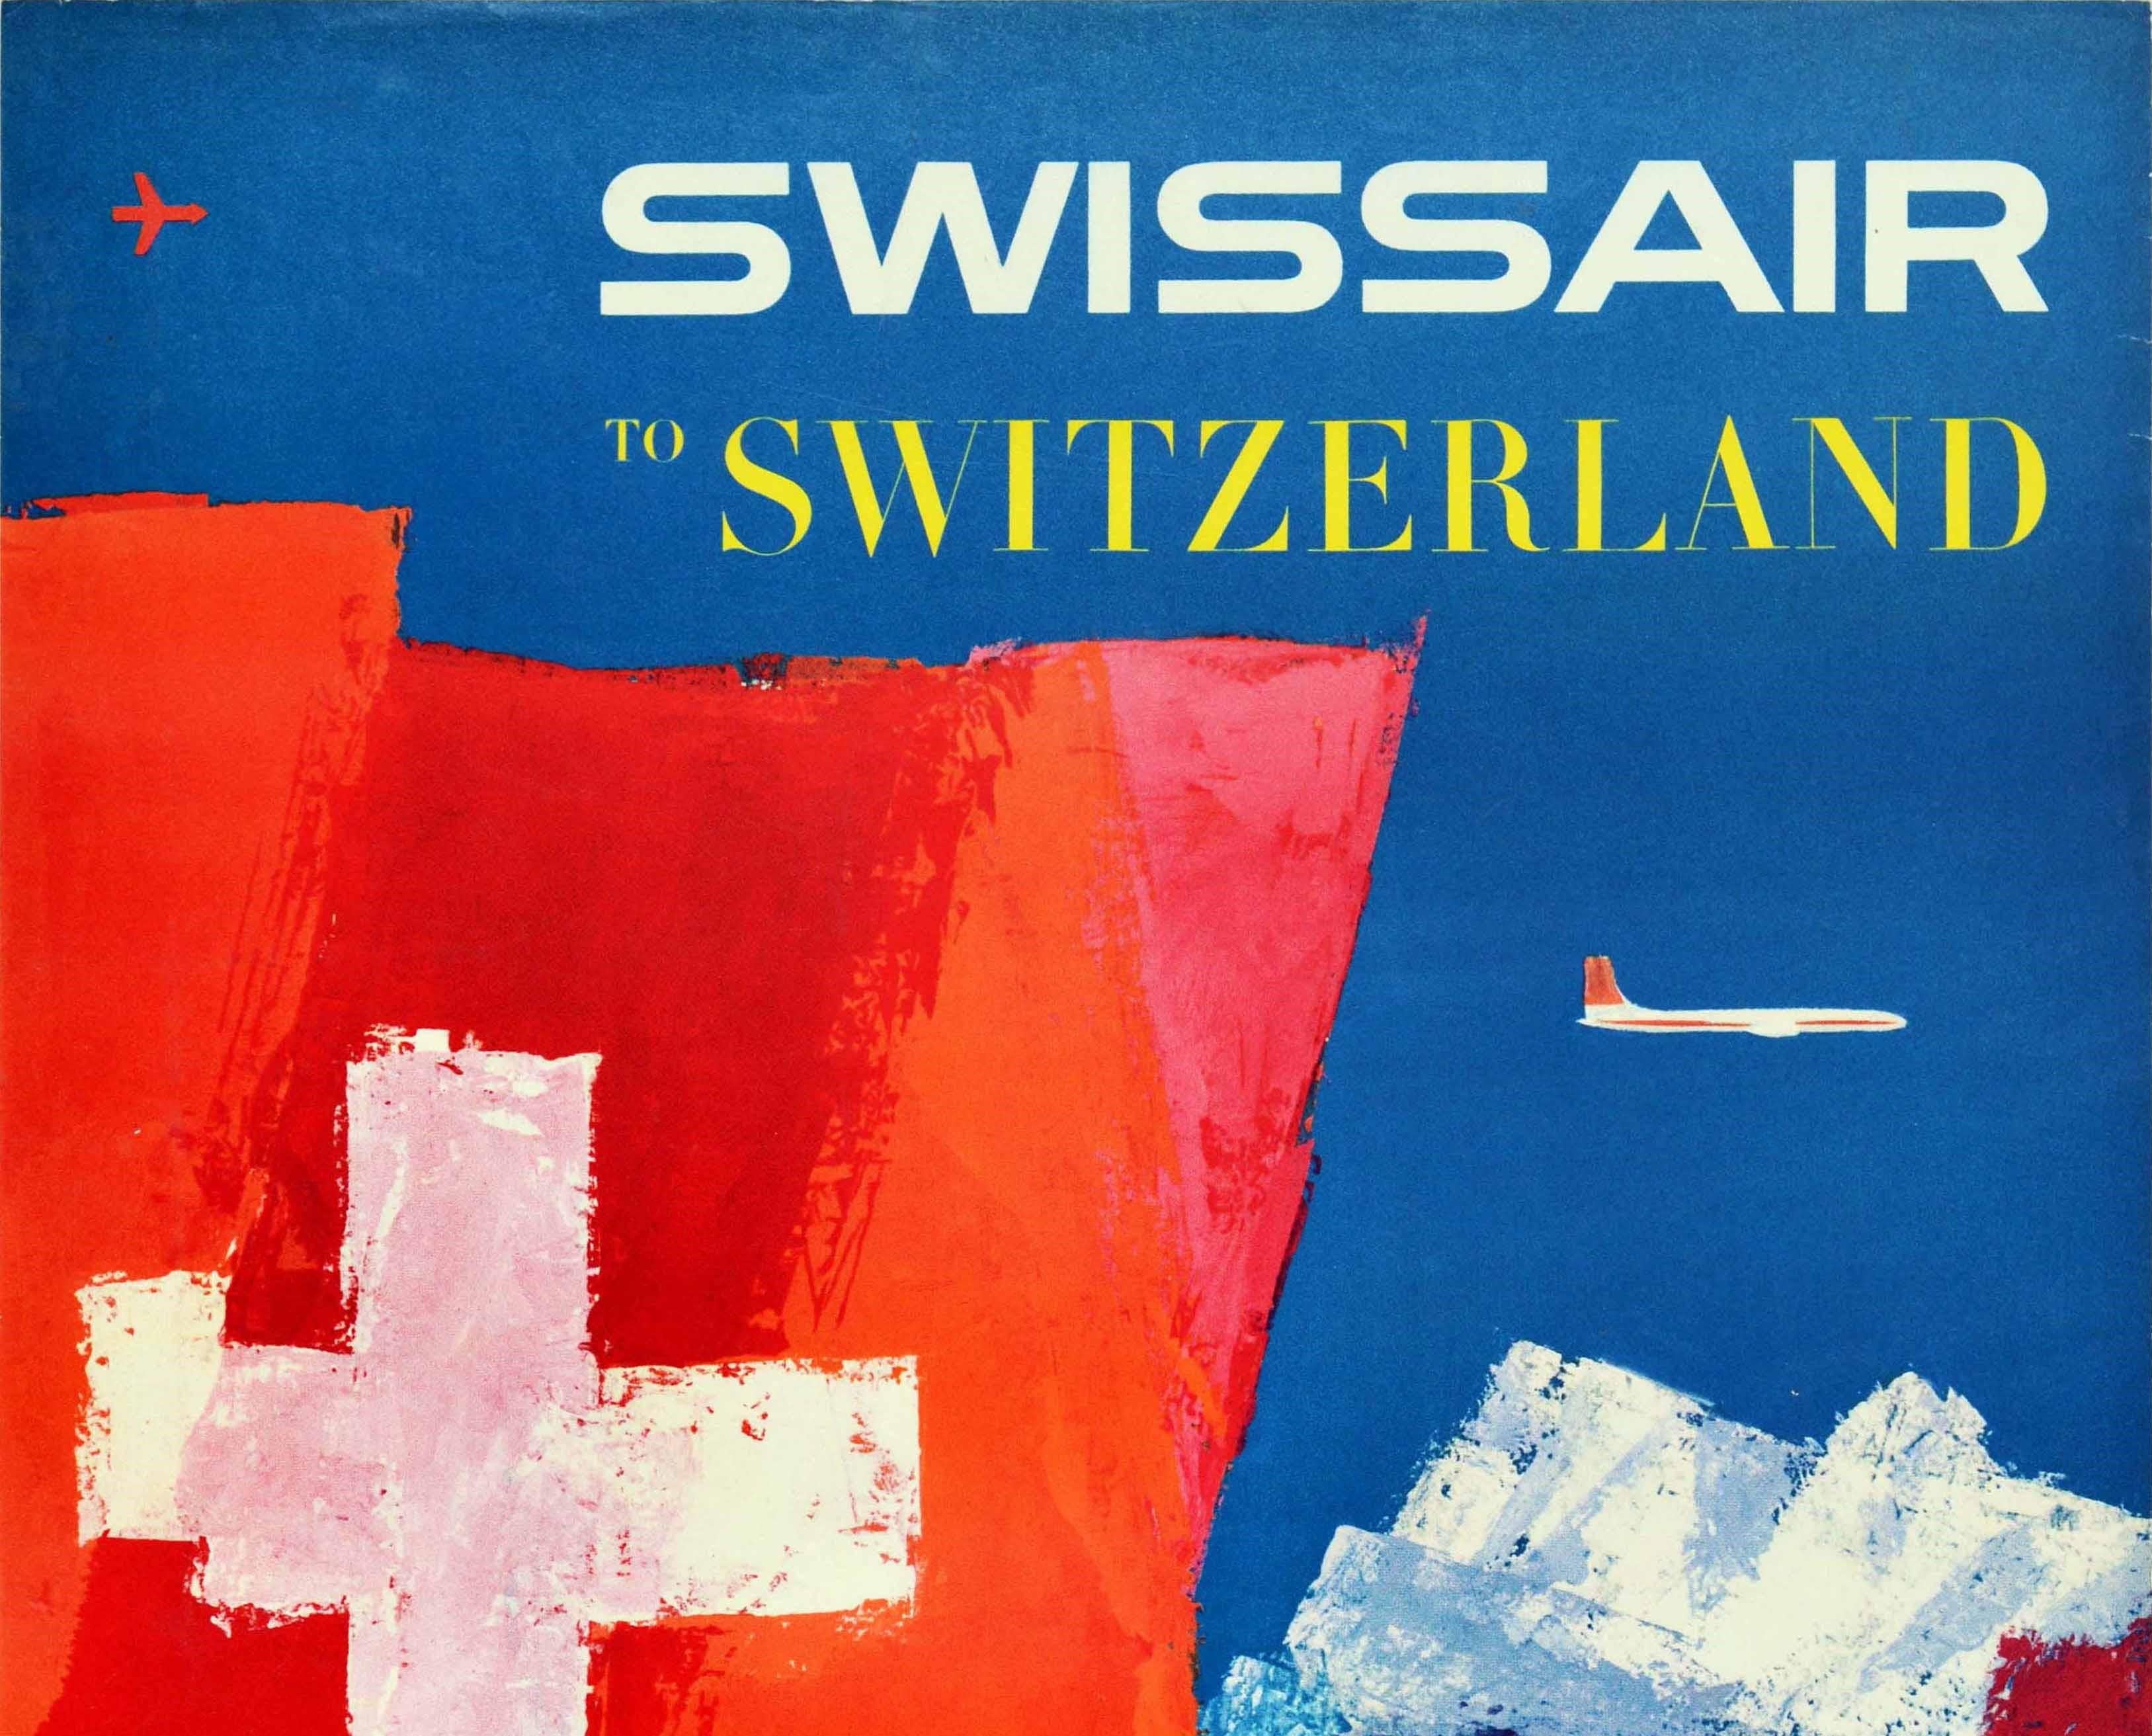 Original vintage travel poster - Swissair to Switzerland - featuring a colourful scenic painting by Fritz Buhler (1909-1963) showing a ferry boat crossing a calm blue lake in a steep valley with a forest on the hill on one side and a steep mountain